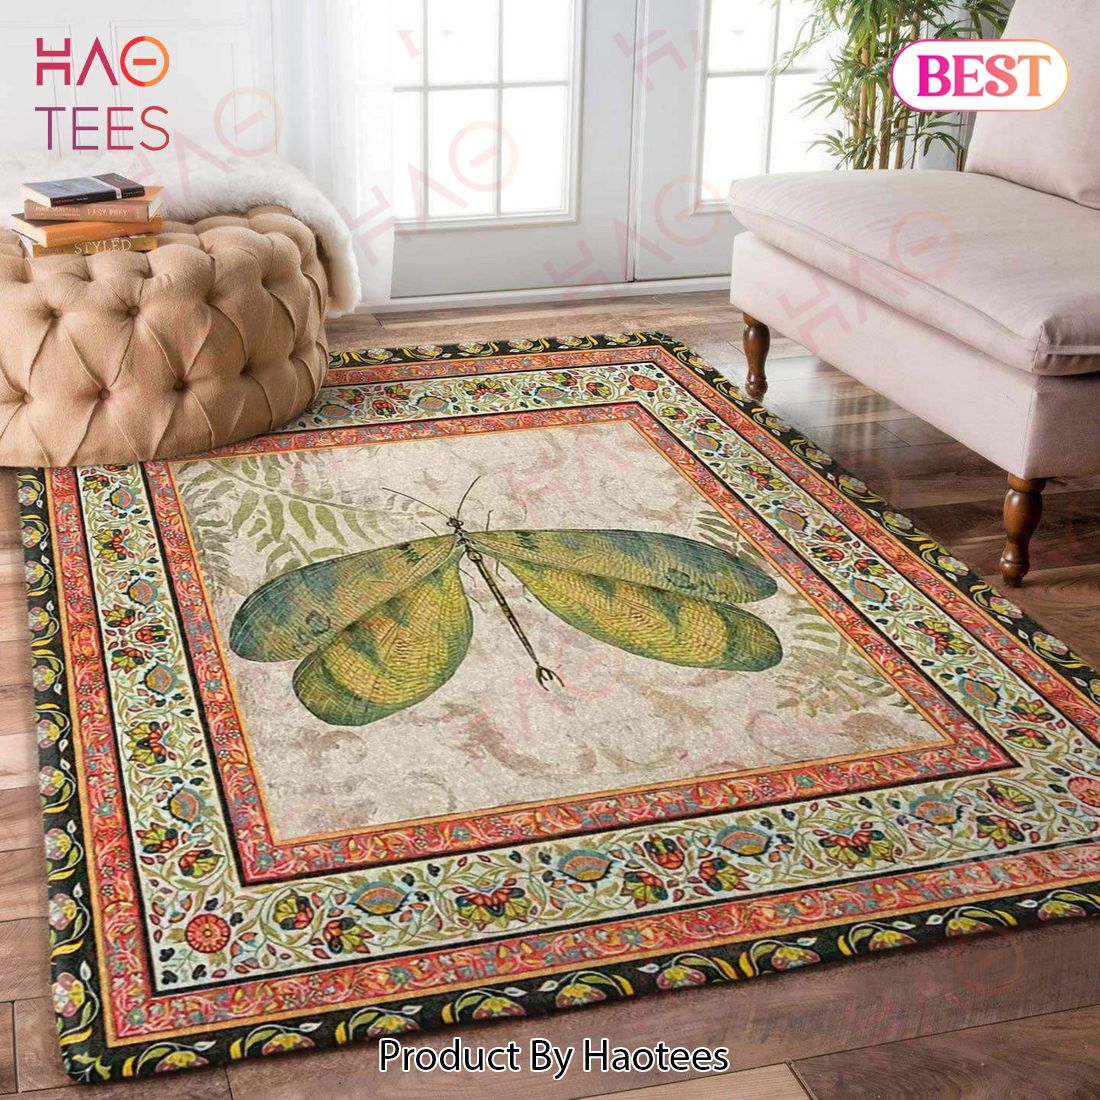 Dragonfly Limited Edition Area Rugs Carpet Mat Kitchen Rugs Floor Decor